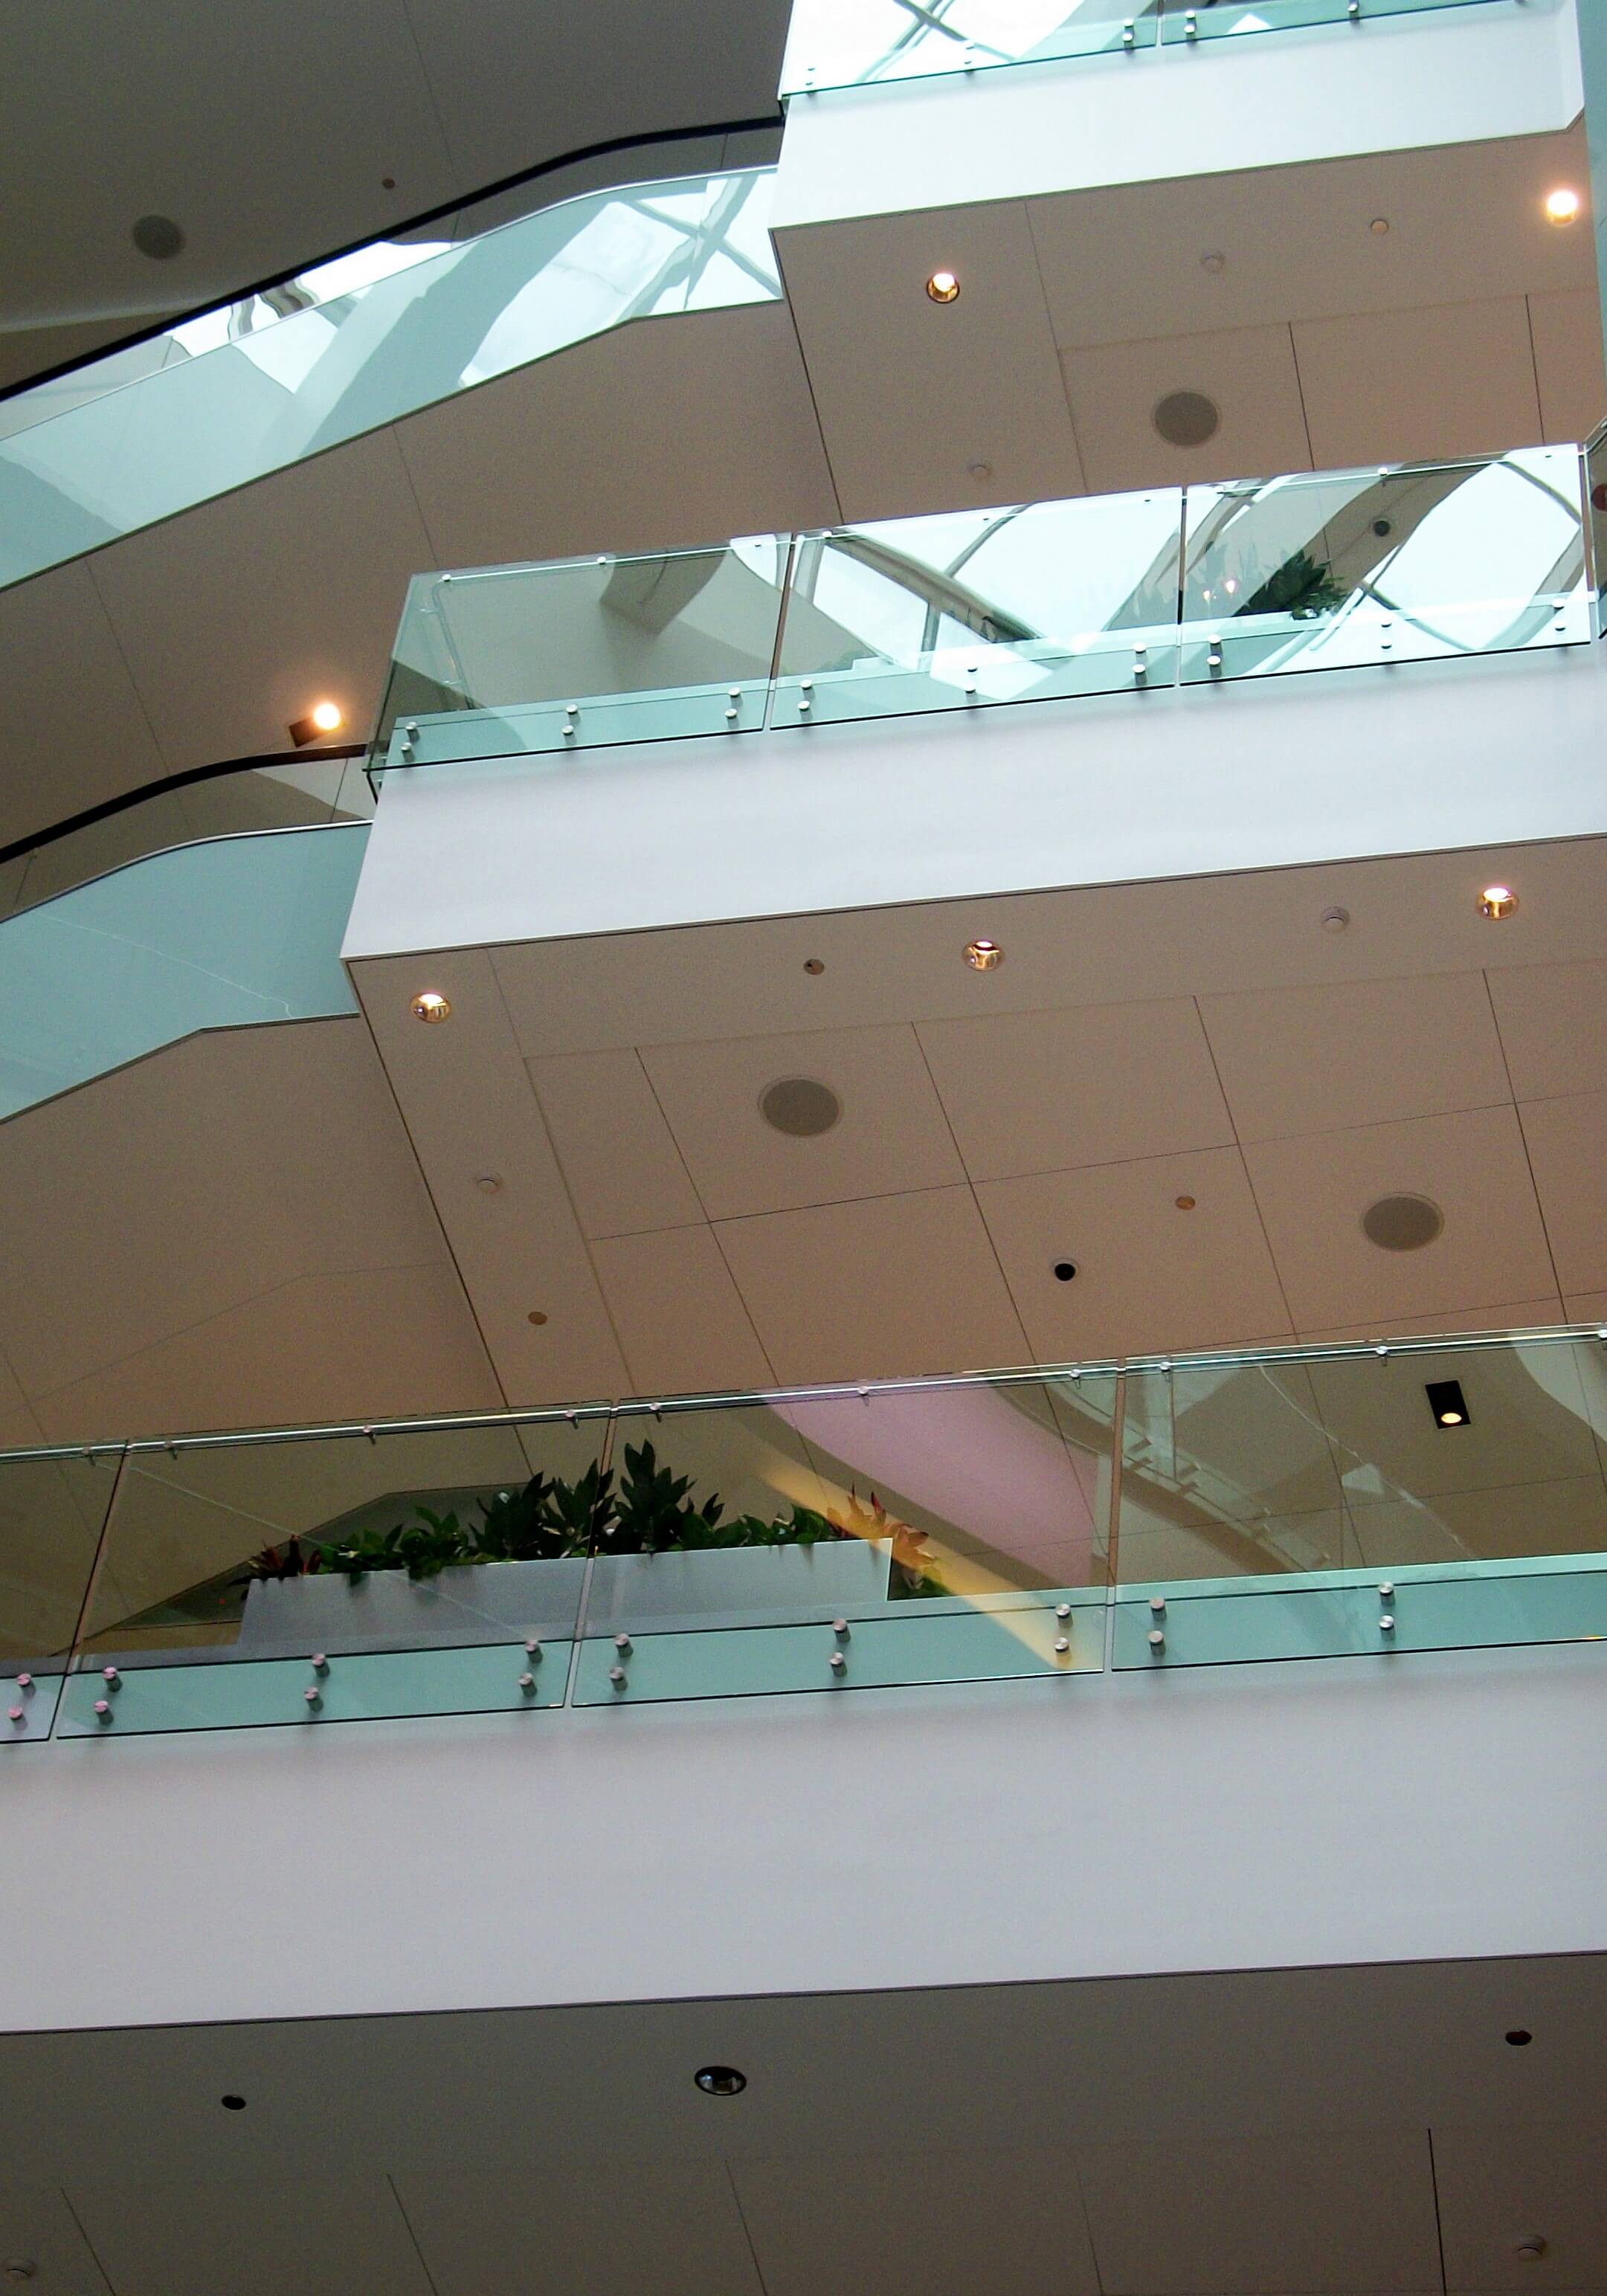 Upward view of 3 levels at a Shopping Mall Chicago, IL, Optik guardrail with clear glass